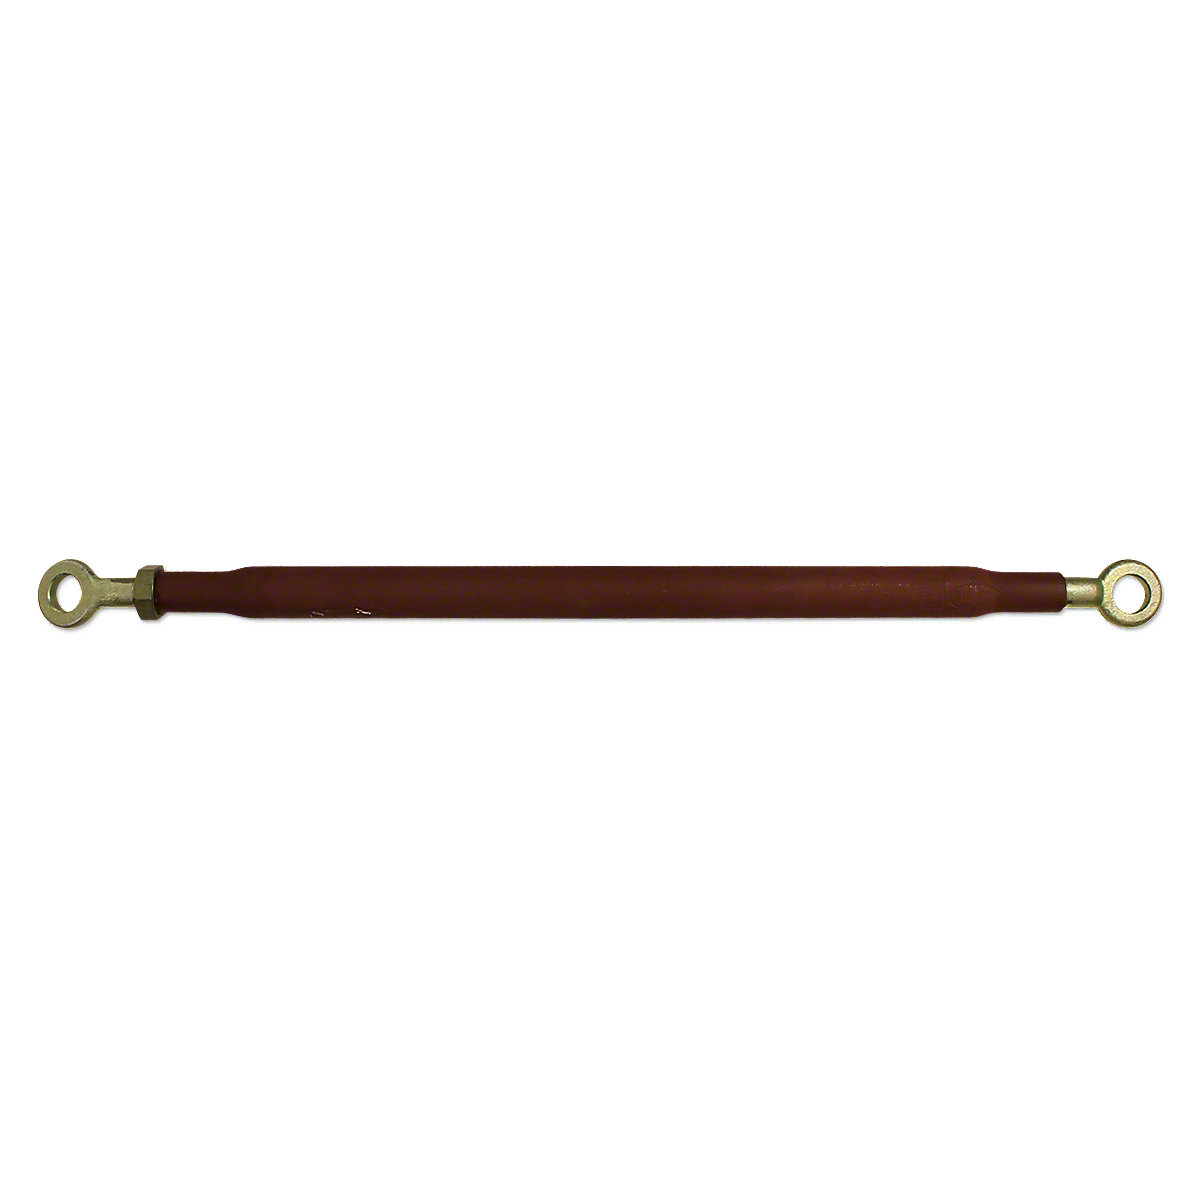 Category 1 Adjustable Stabilizer Bar For Massey Ferguson: F40, FE35, TE20, TEA20-85, TO20, TO30, TO35, 130, 135, 150, 202, 203, 204, 205, 2135, 230, 35, 362, 363, 50, Massey Harris: 50. 